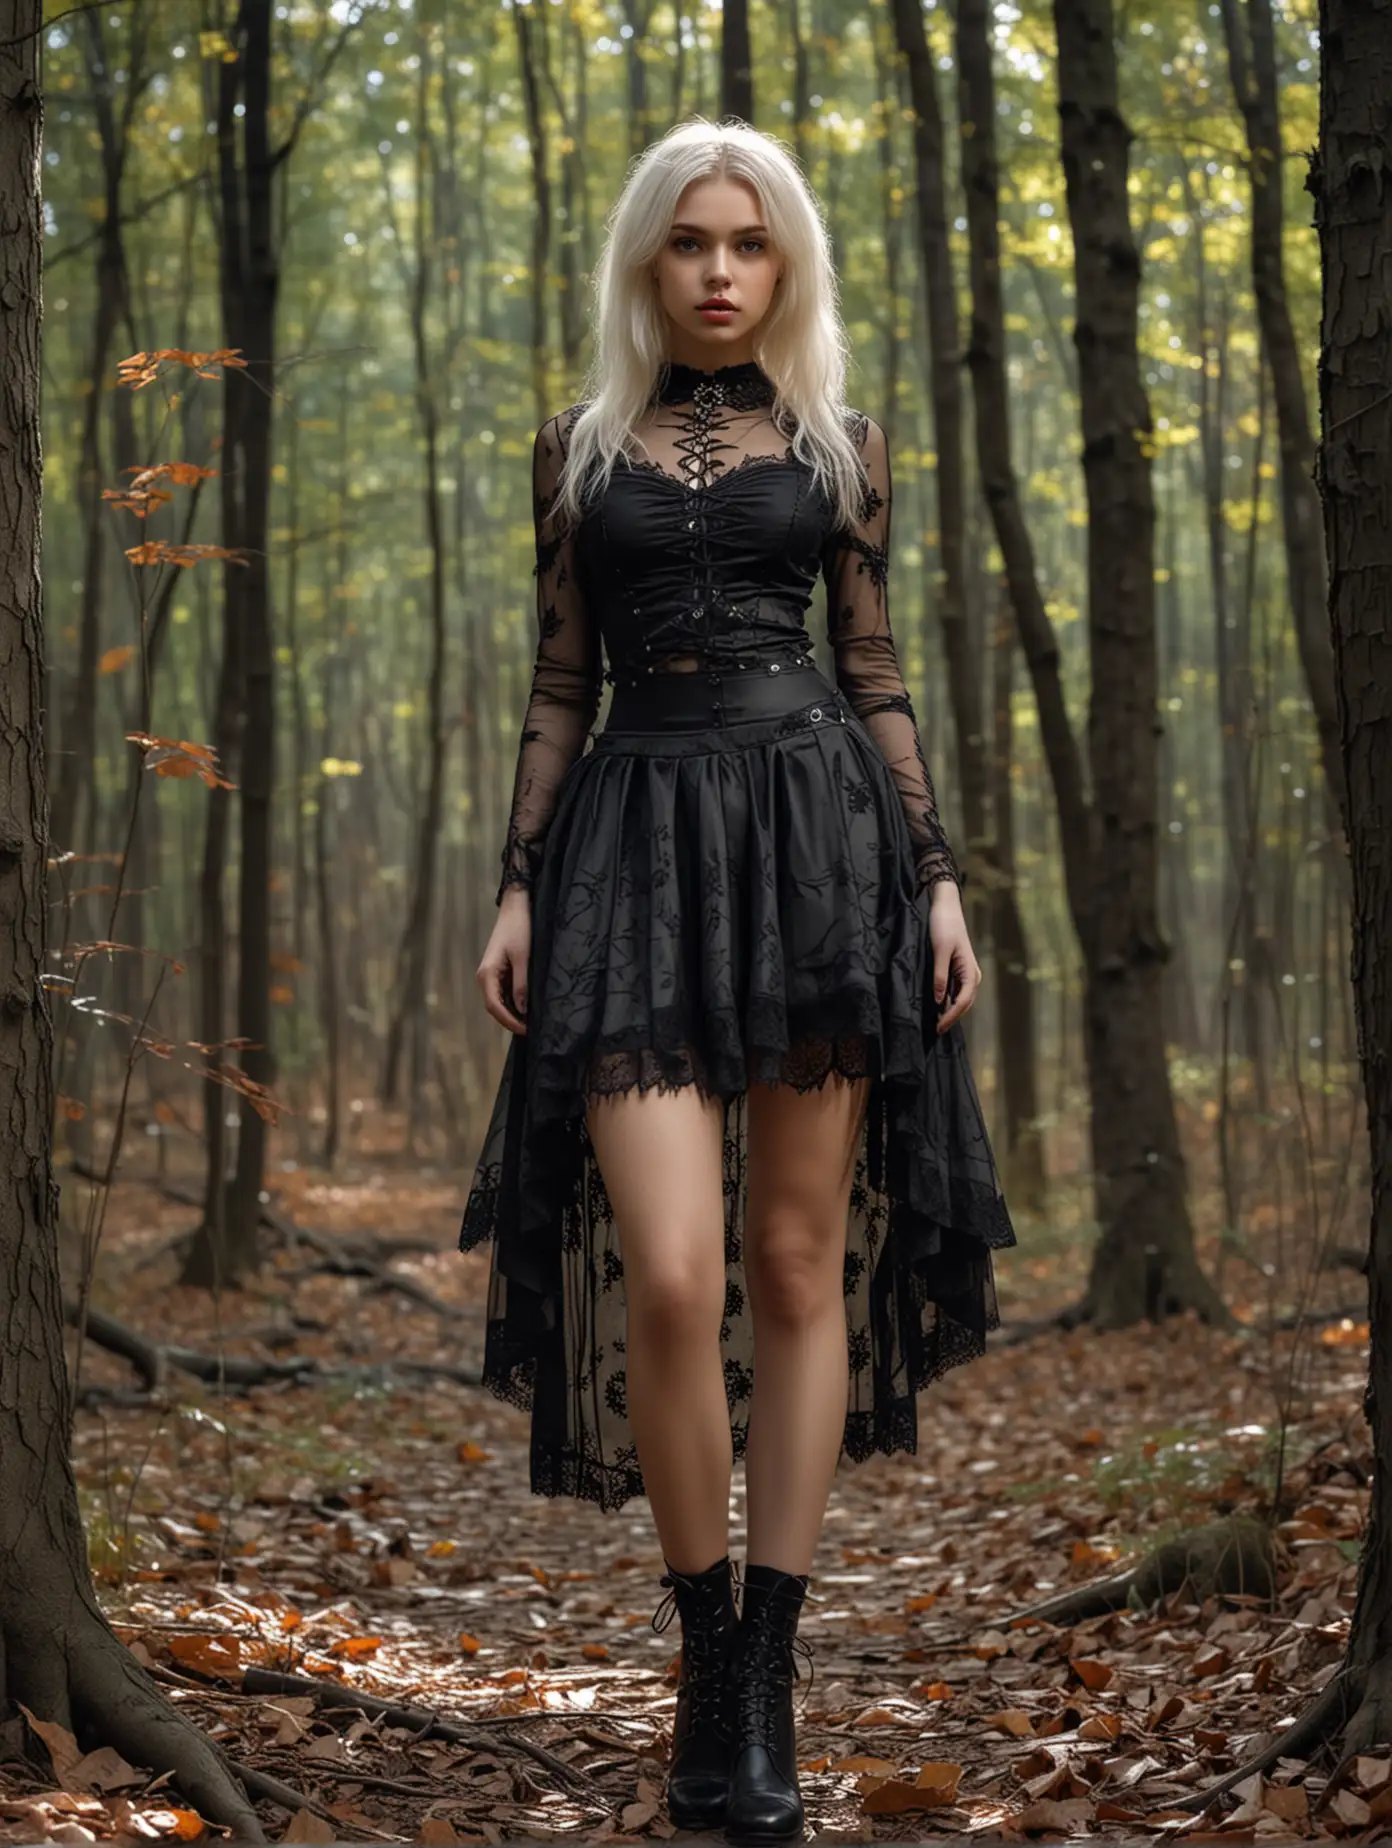 Stunning-Russian-Model-in-Gothic-Sheer-Costume-Poses-in-Enchanted-Forest